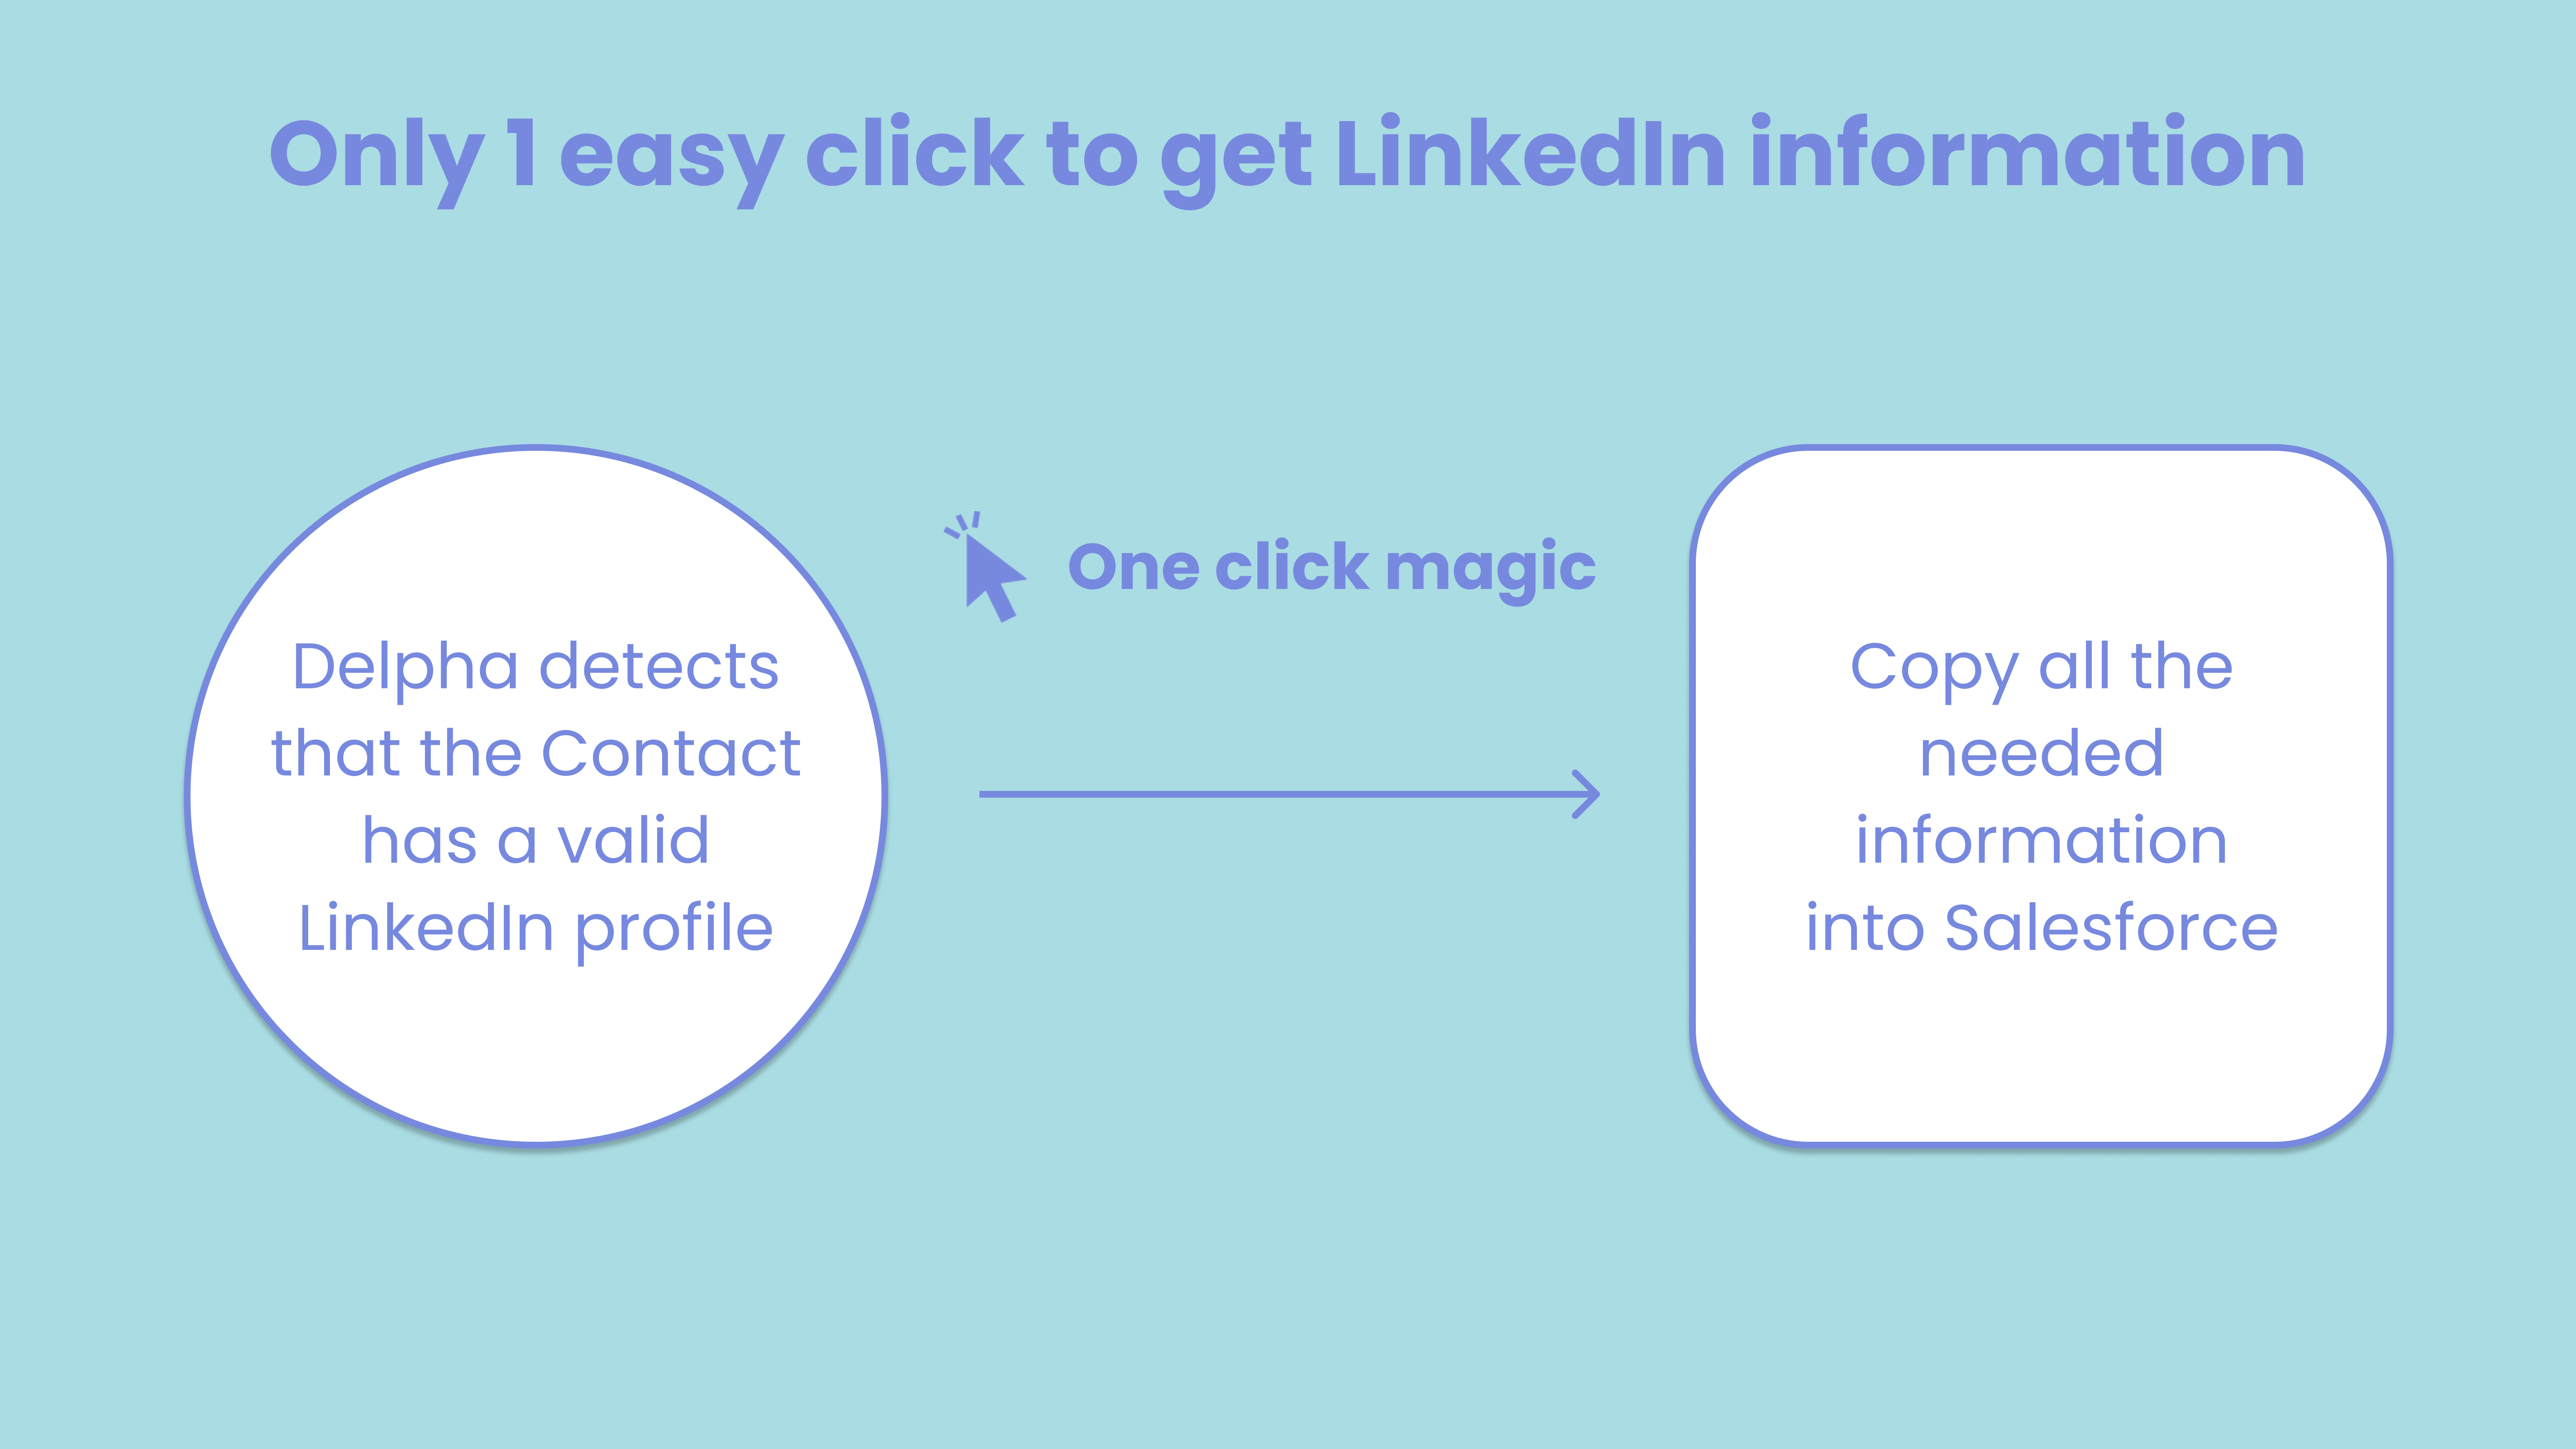 Delpha is able to import contact data from LinkedIn into Salesforce in one simple click.